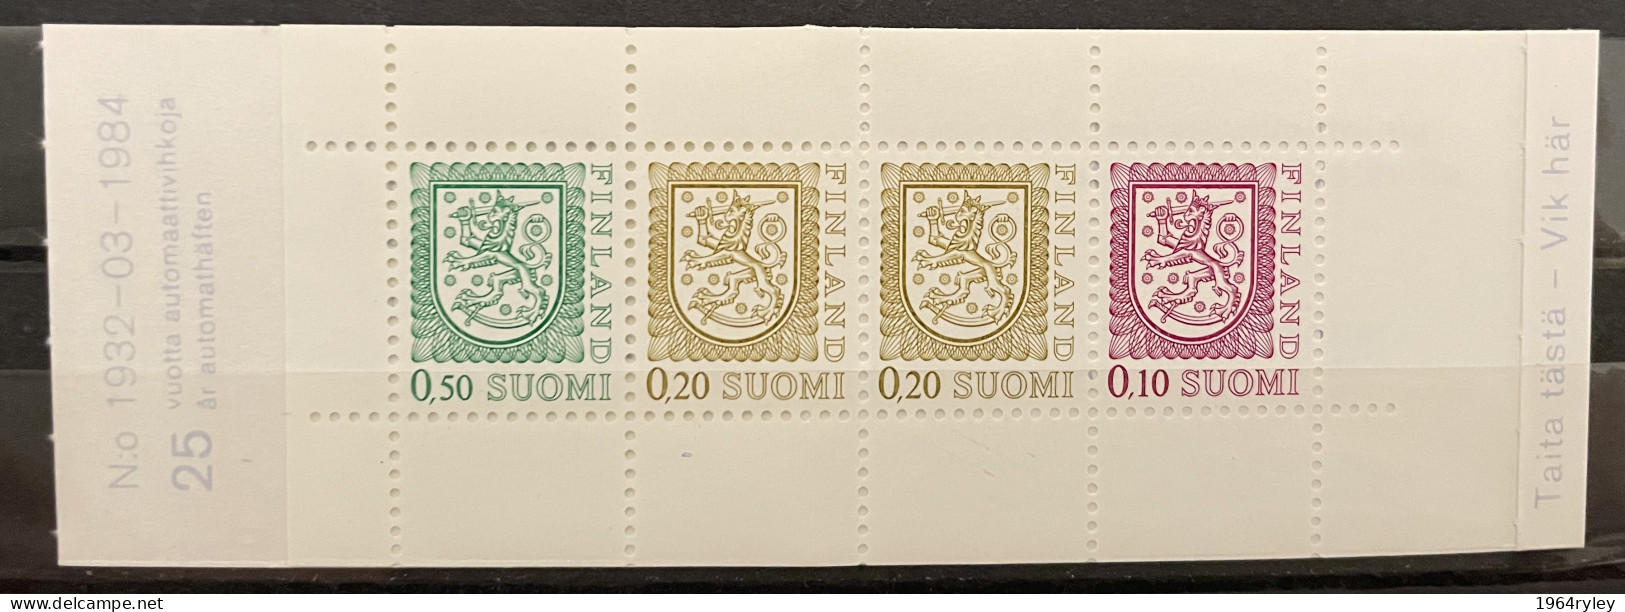 FINLAND  - MNH** - 1984 - # BOOKLET # MH 14 - Booklets